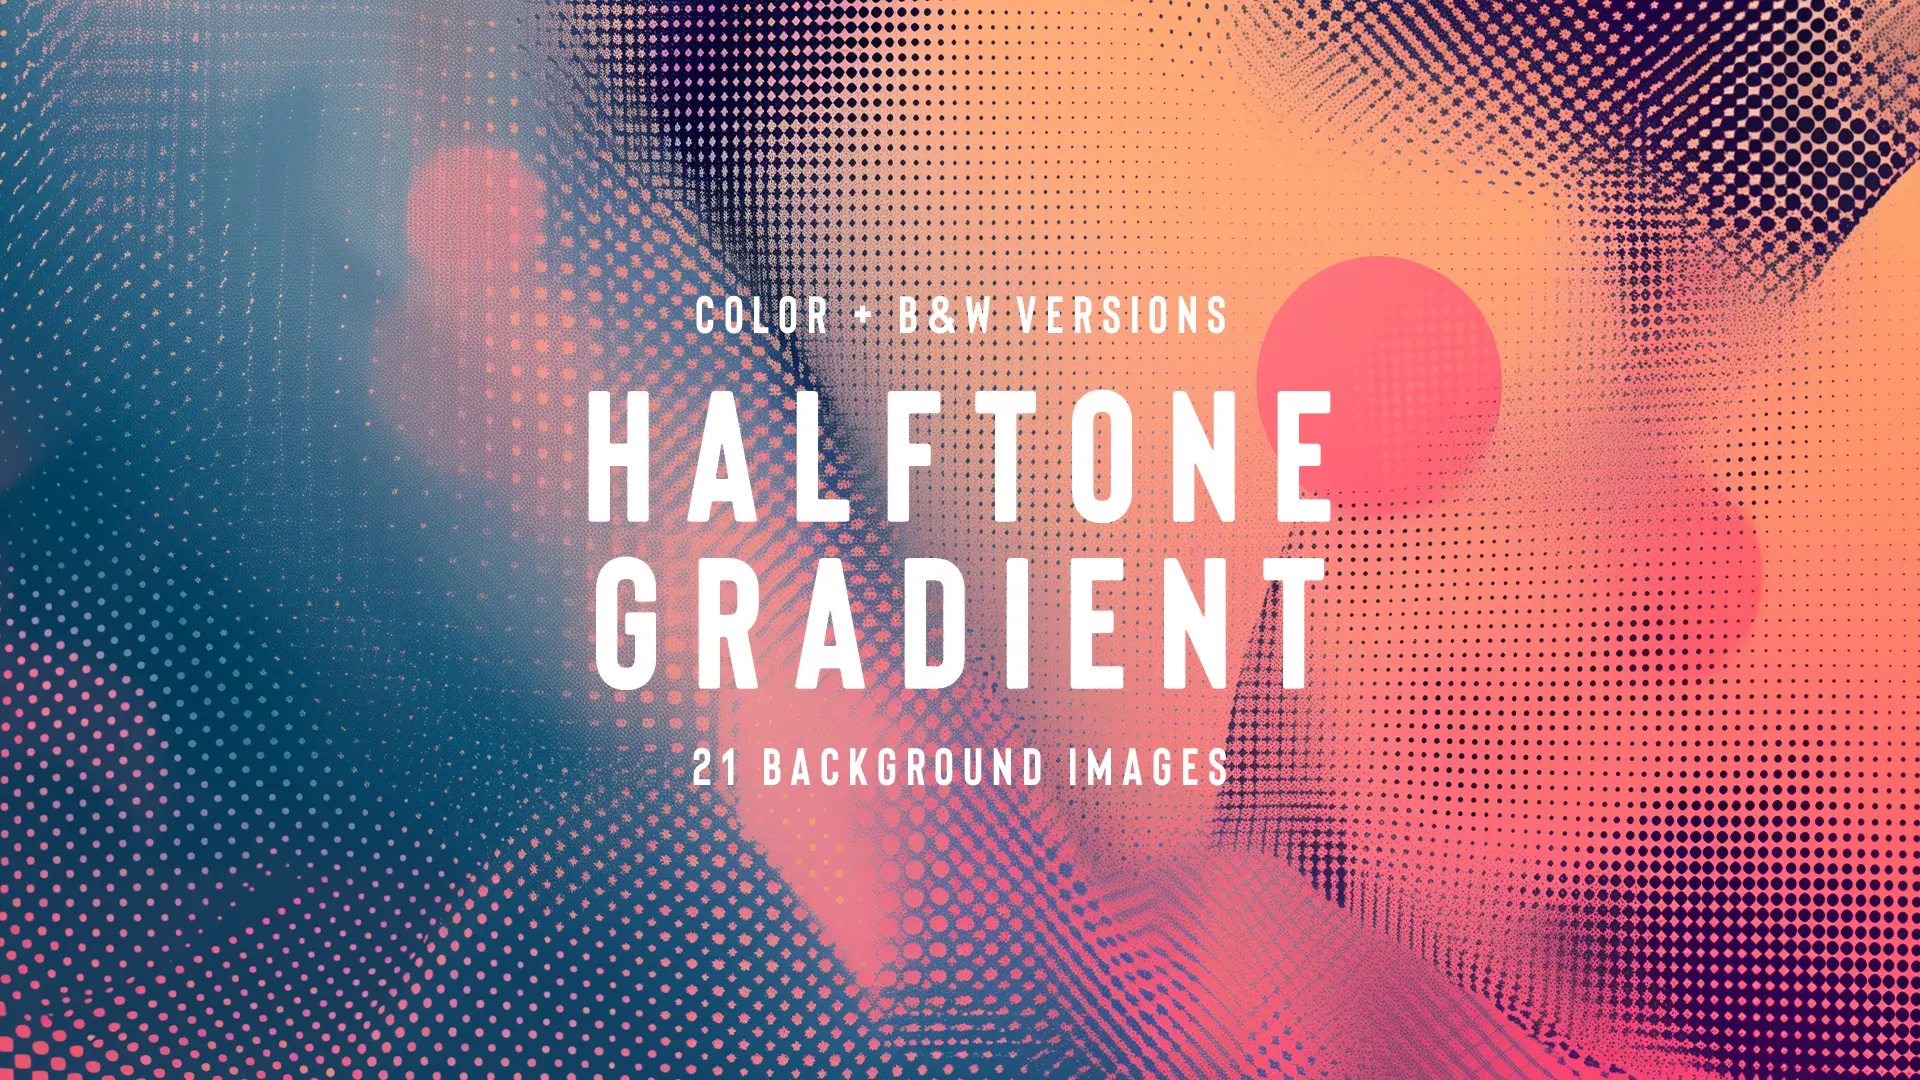 Boost Your Church Media'S Visual Impact With Our &Quot;Halftone Gradient&Quot; Background Set. This Versatile Collection Offers 21 Images In Both Color And B&Amp;W, Perfect For Adding A Contemporary Edge To Your Presentations And Designs.